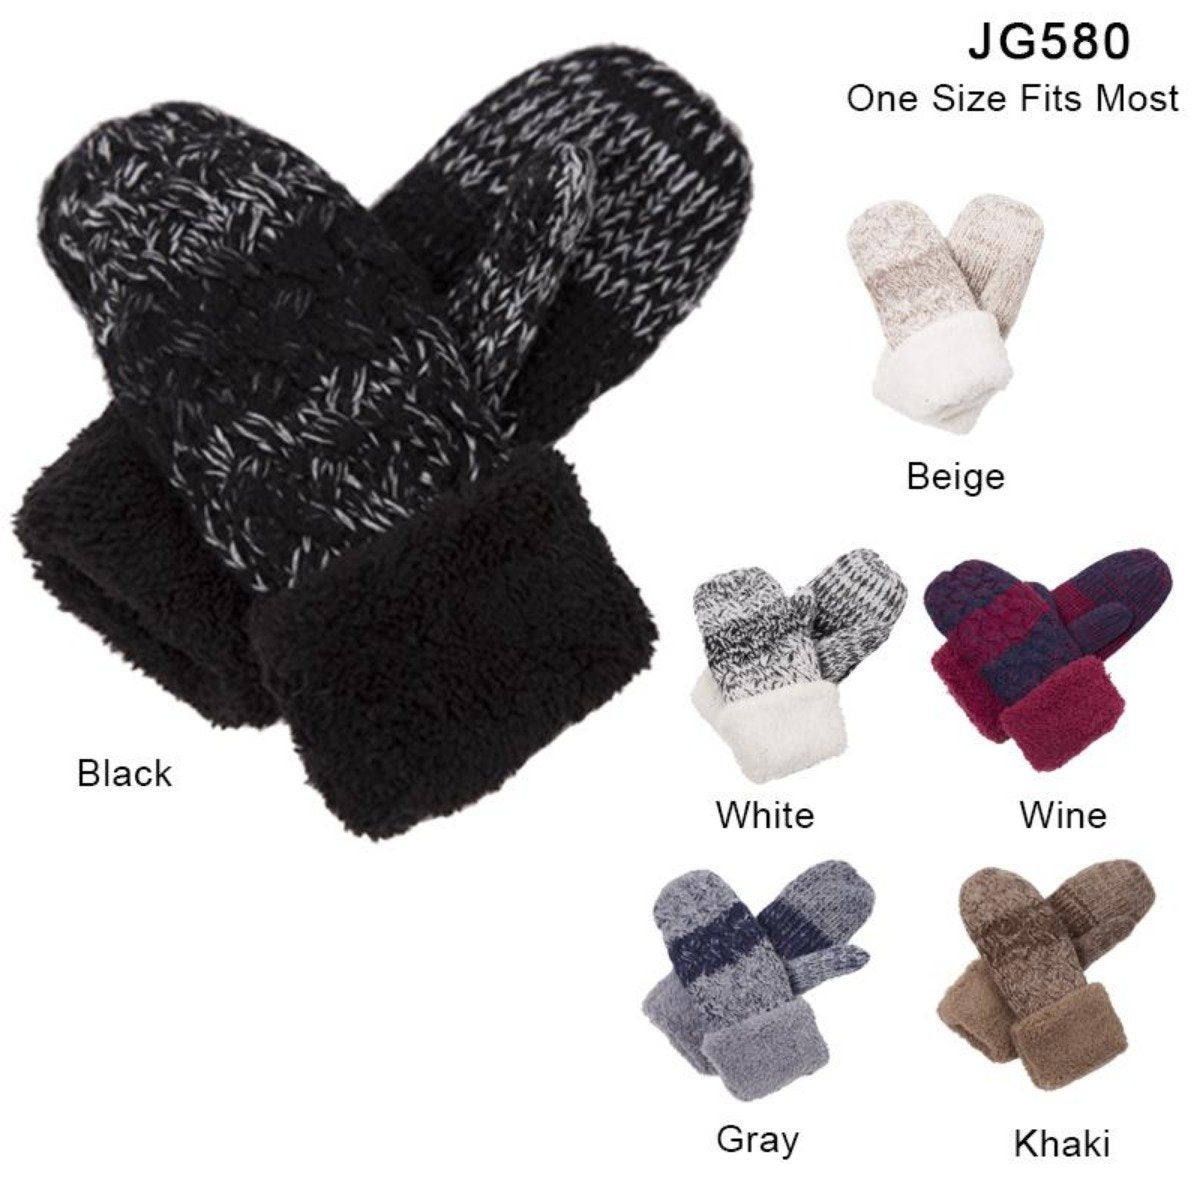 Two-Tone Knitted Mittens W/ Fleece Cuffs - 12Pc Set